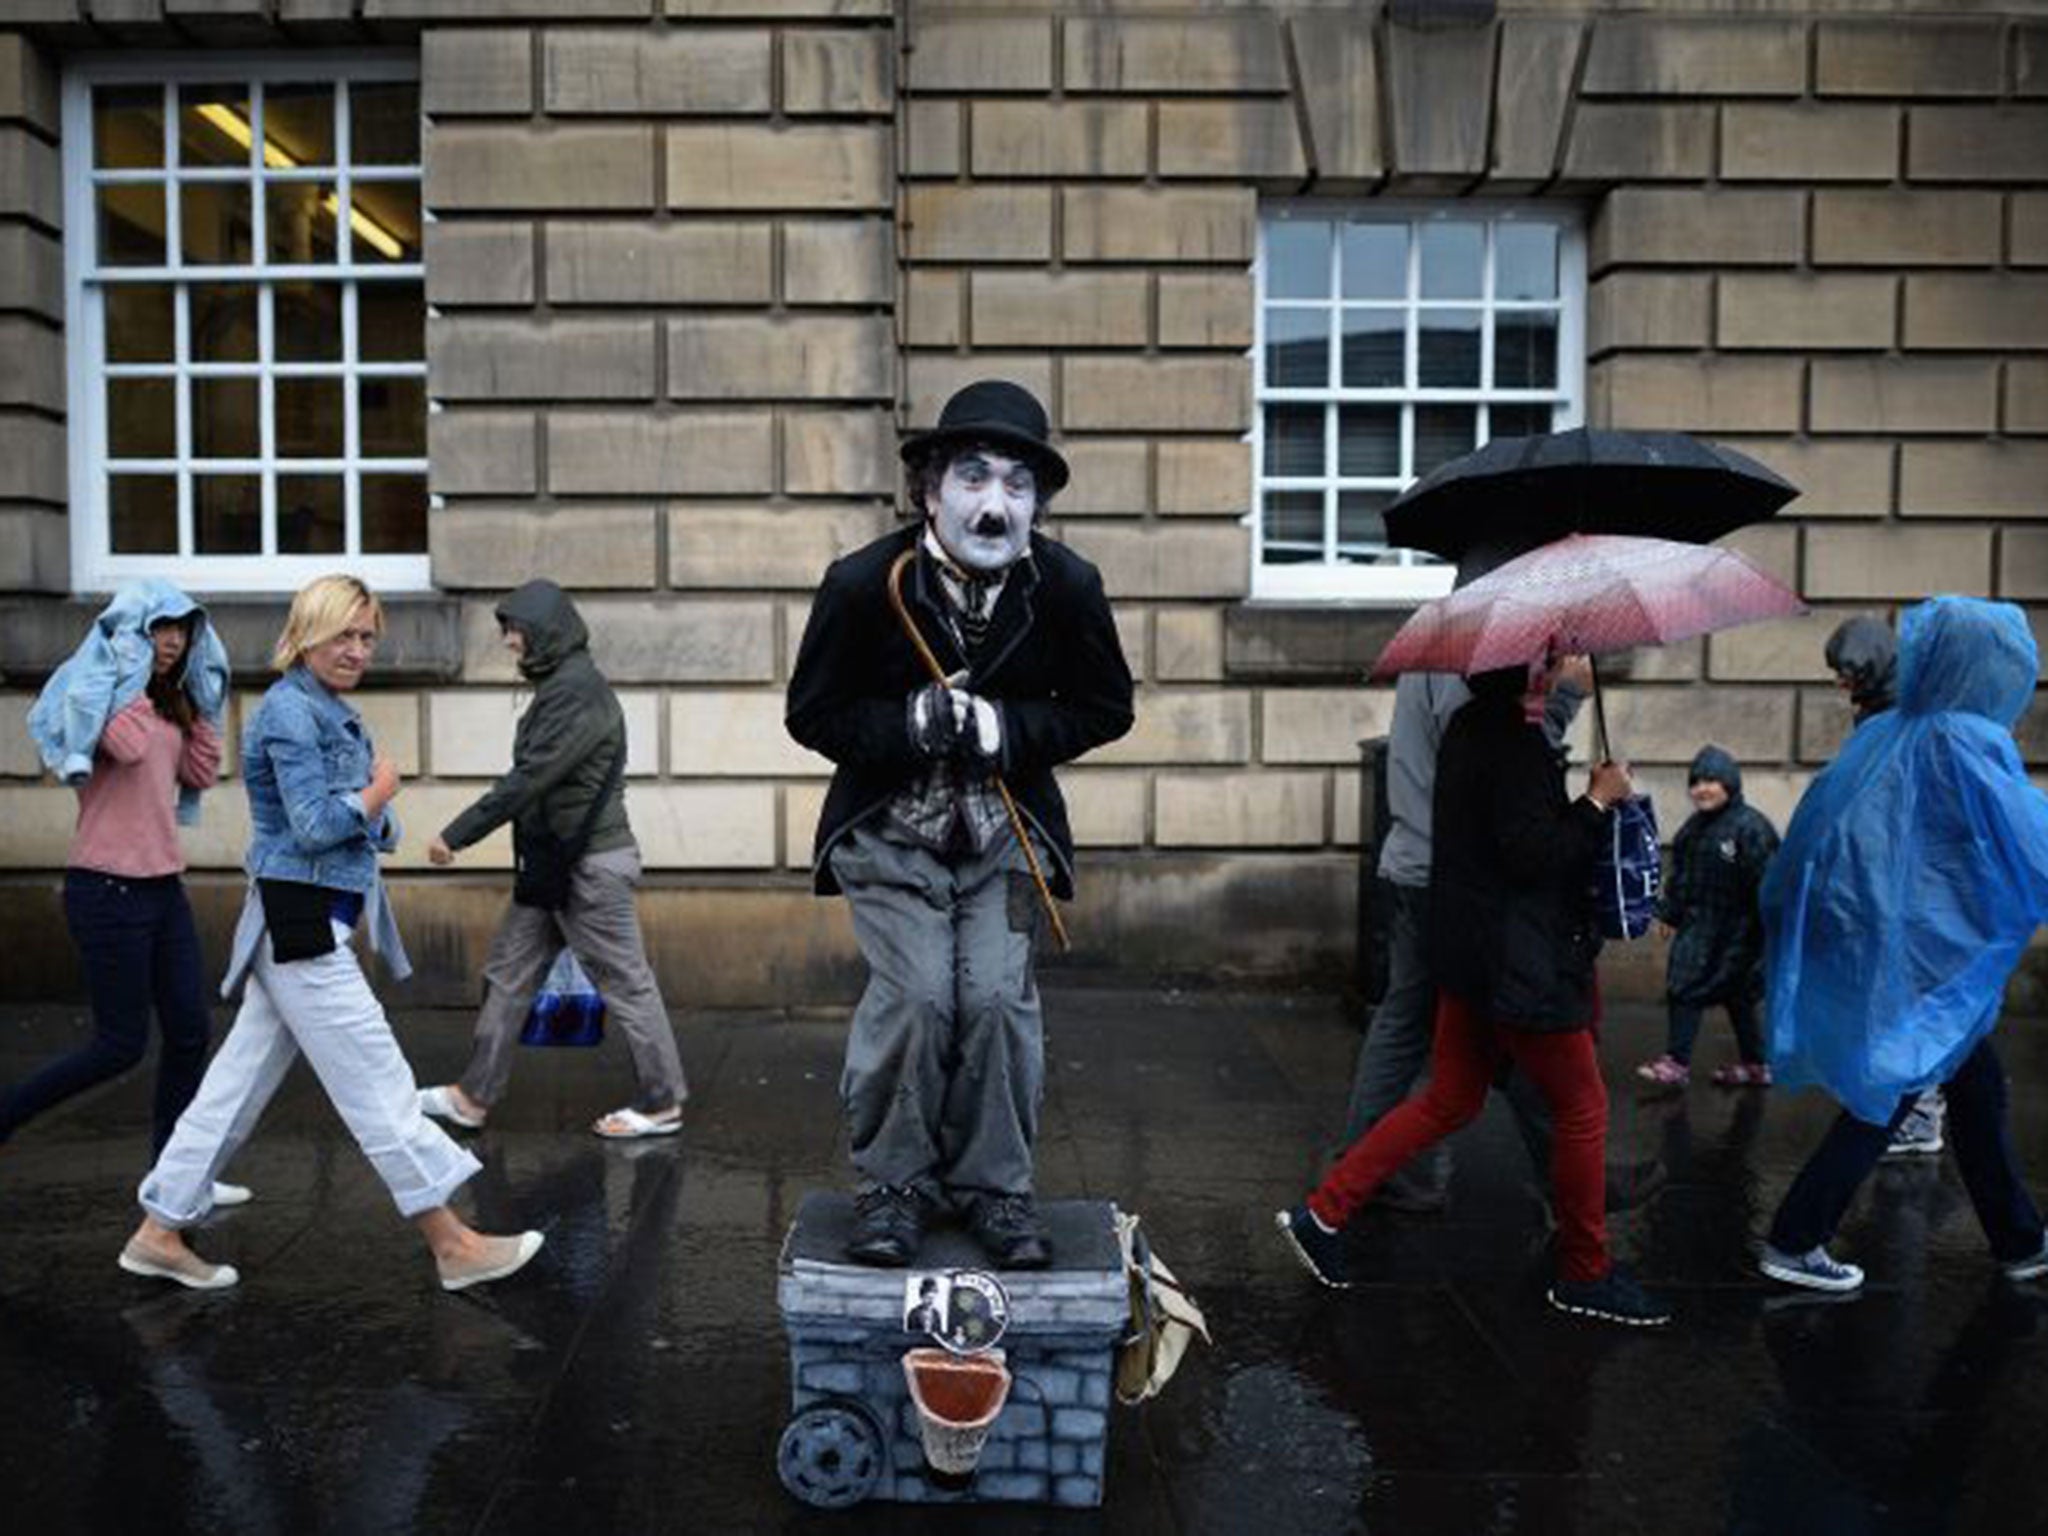 Members of the public, walk past a street entertainer on the Royal Mile